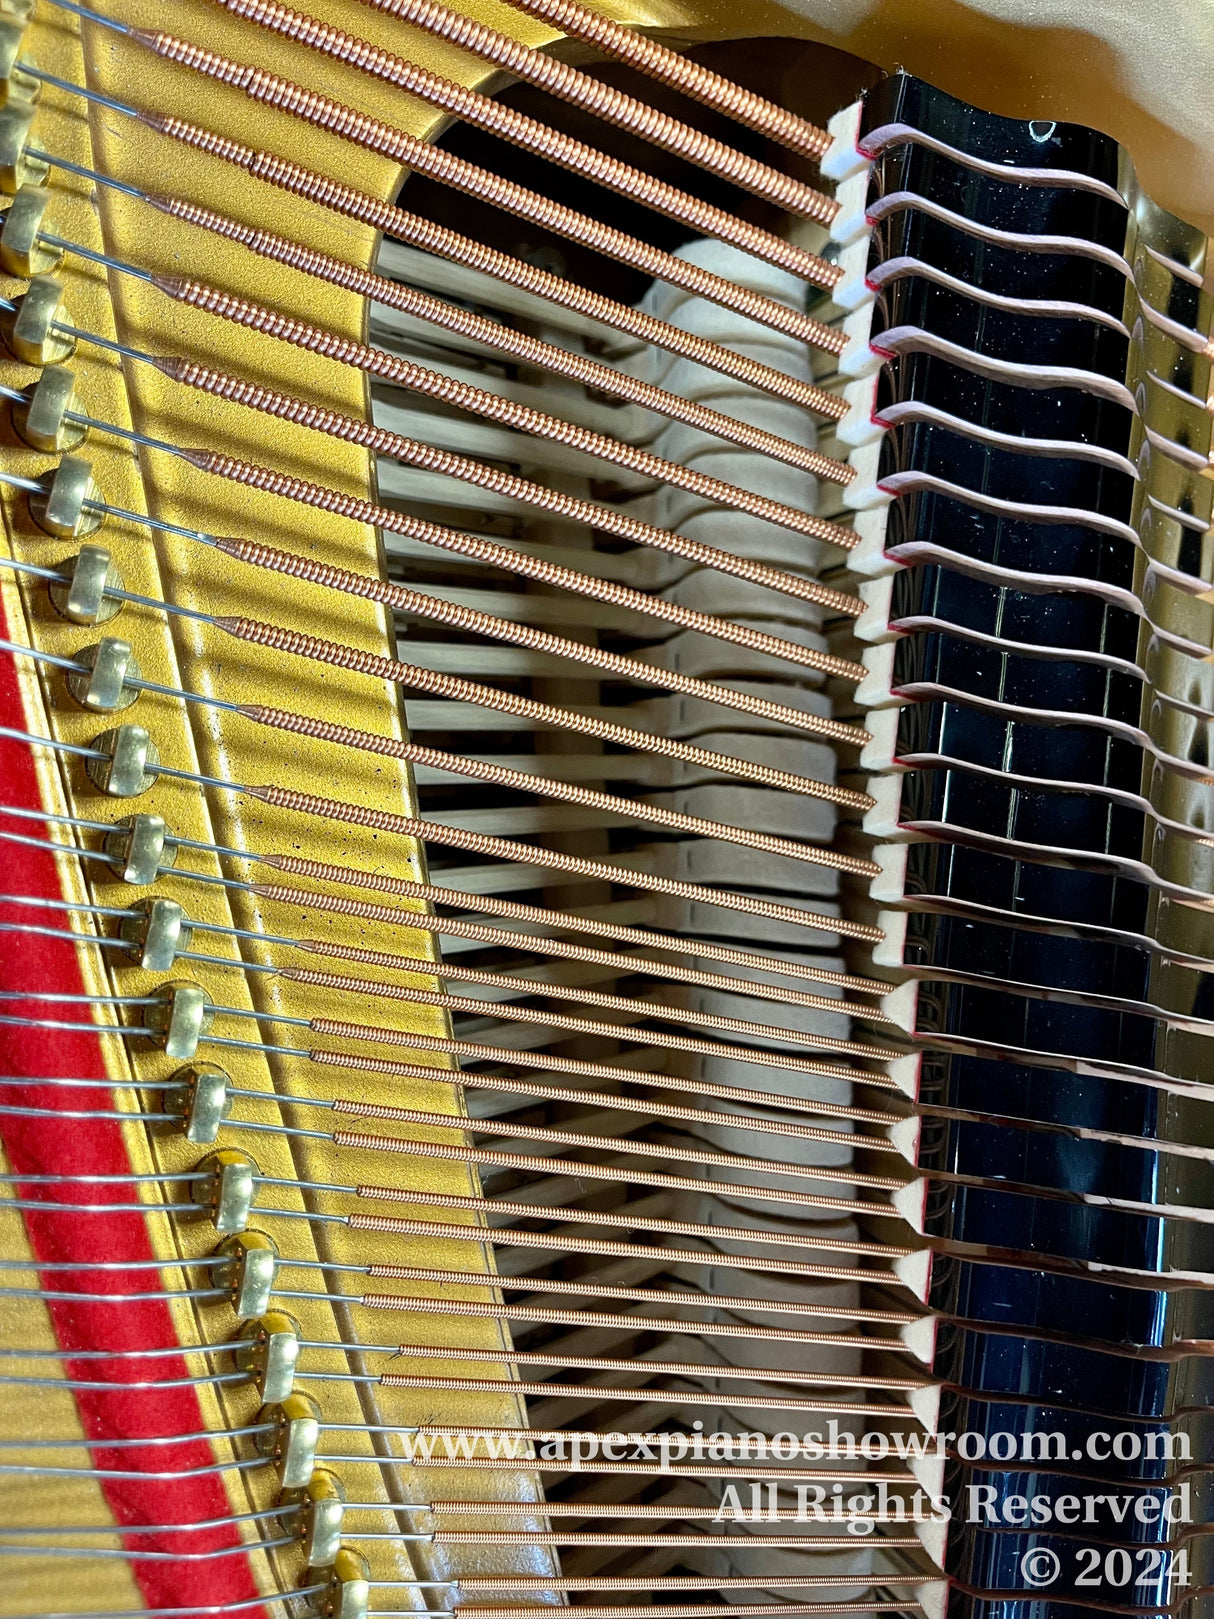 Close-up view of a pianos internal mechanism showing copper wound bass strings and steel treble strings attached to tuning pins, felt dampers in black, and gold-painted cast iron frame, embodying the intricate design and craftsmanship of a pianos soundboard and string layout.